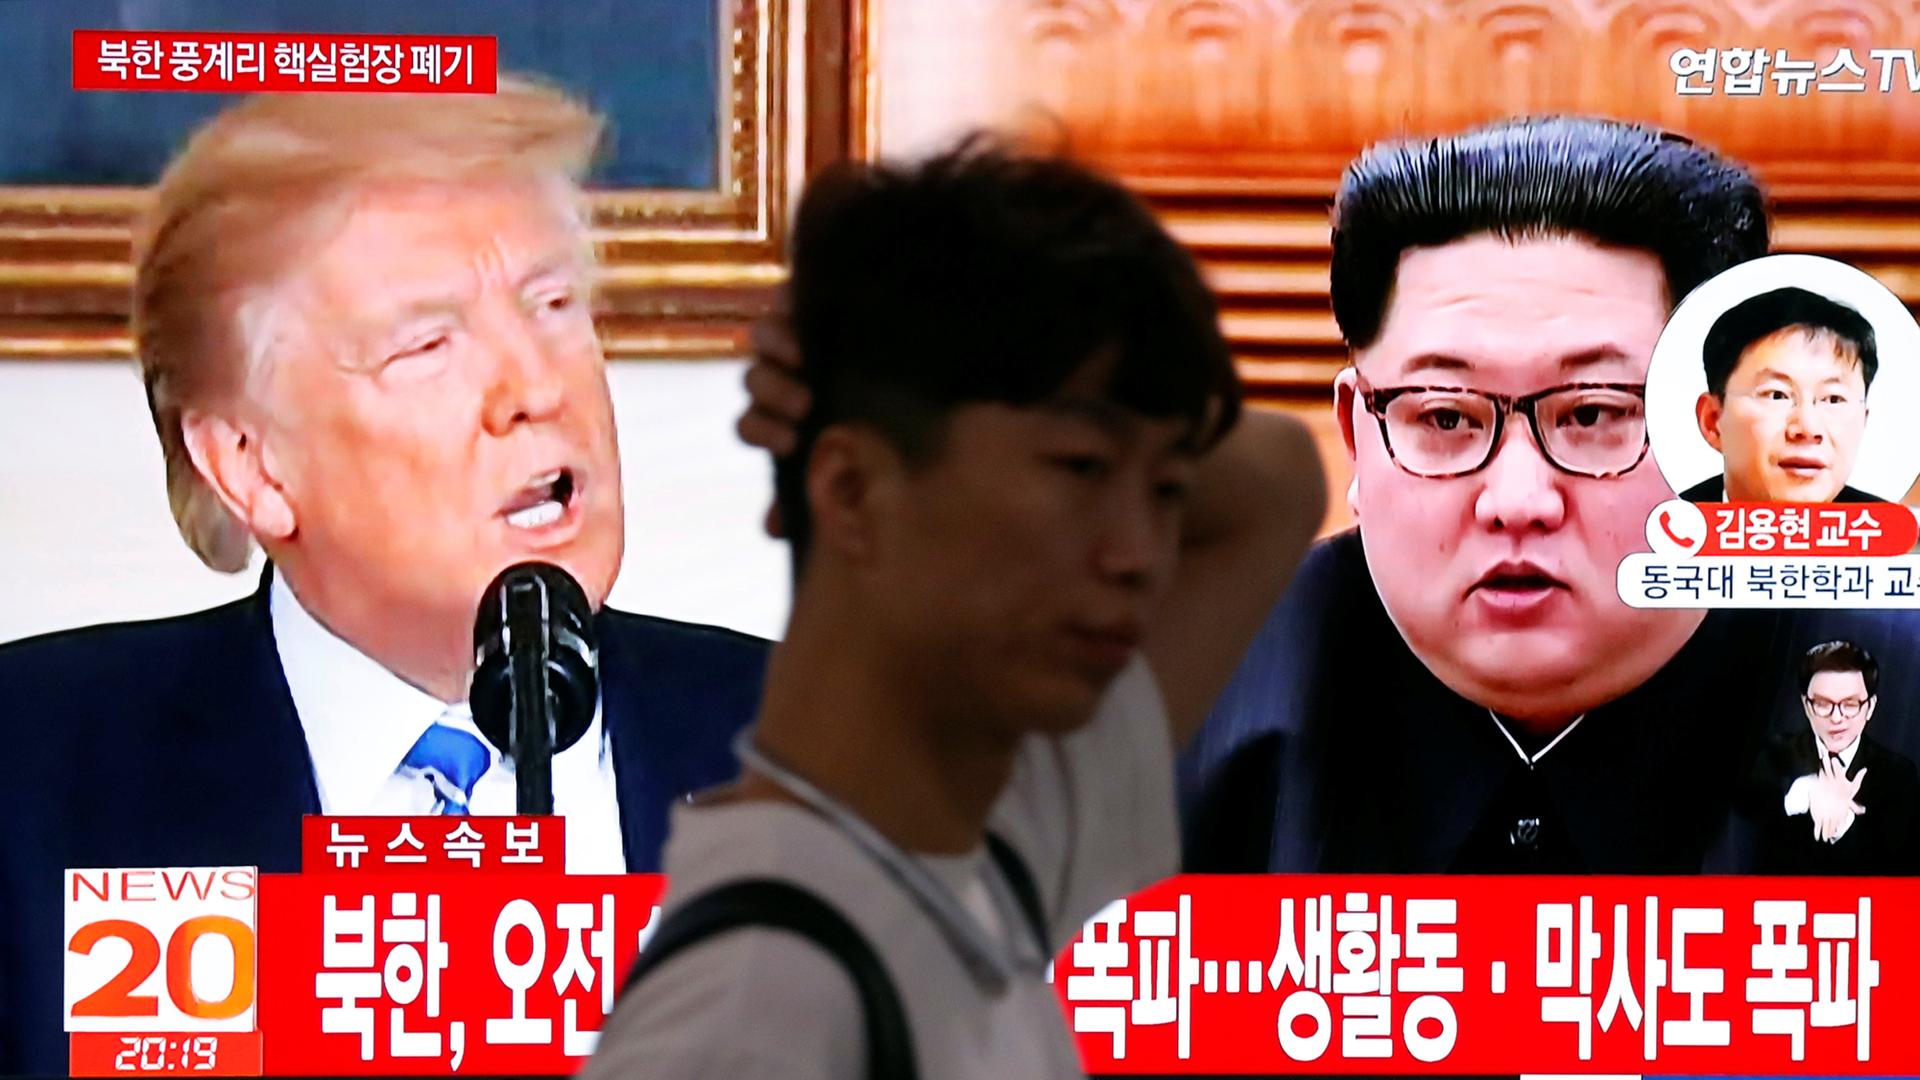 A man walks past a TV showing US President Donald Trump and North Korean leader Kim Jong-un, in Seoul, May 24, 2018.